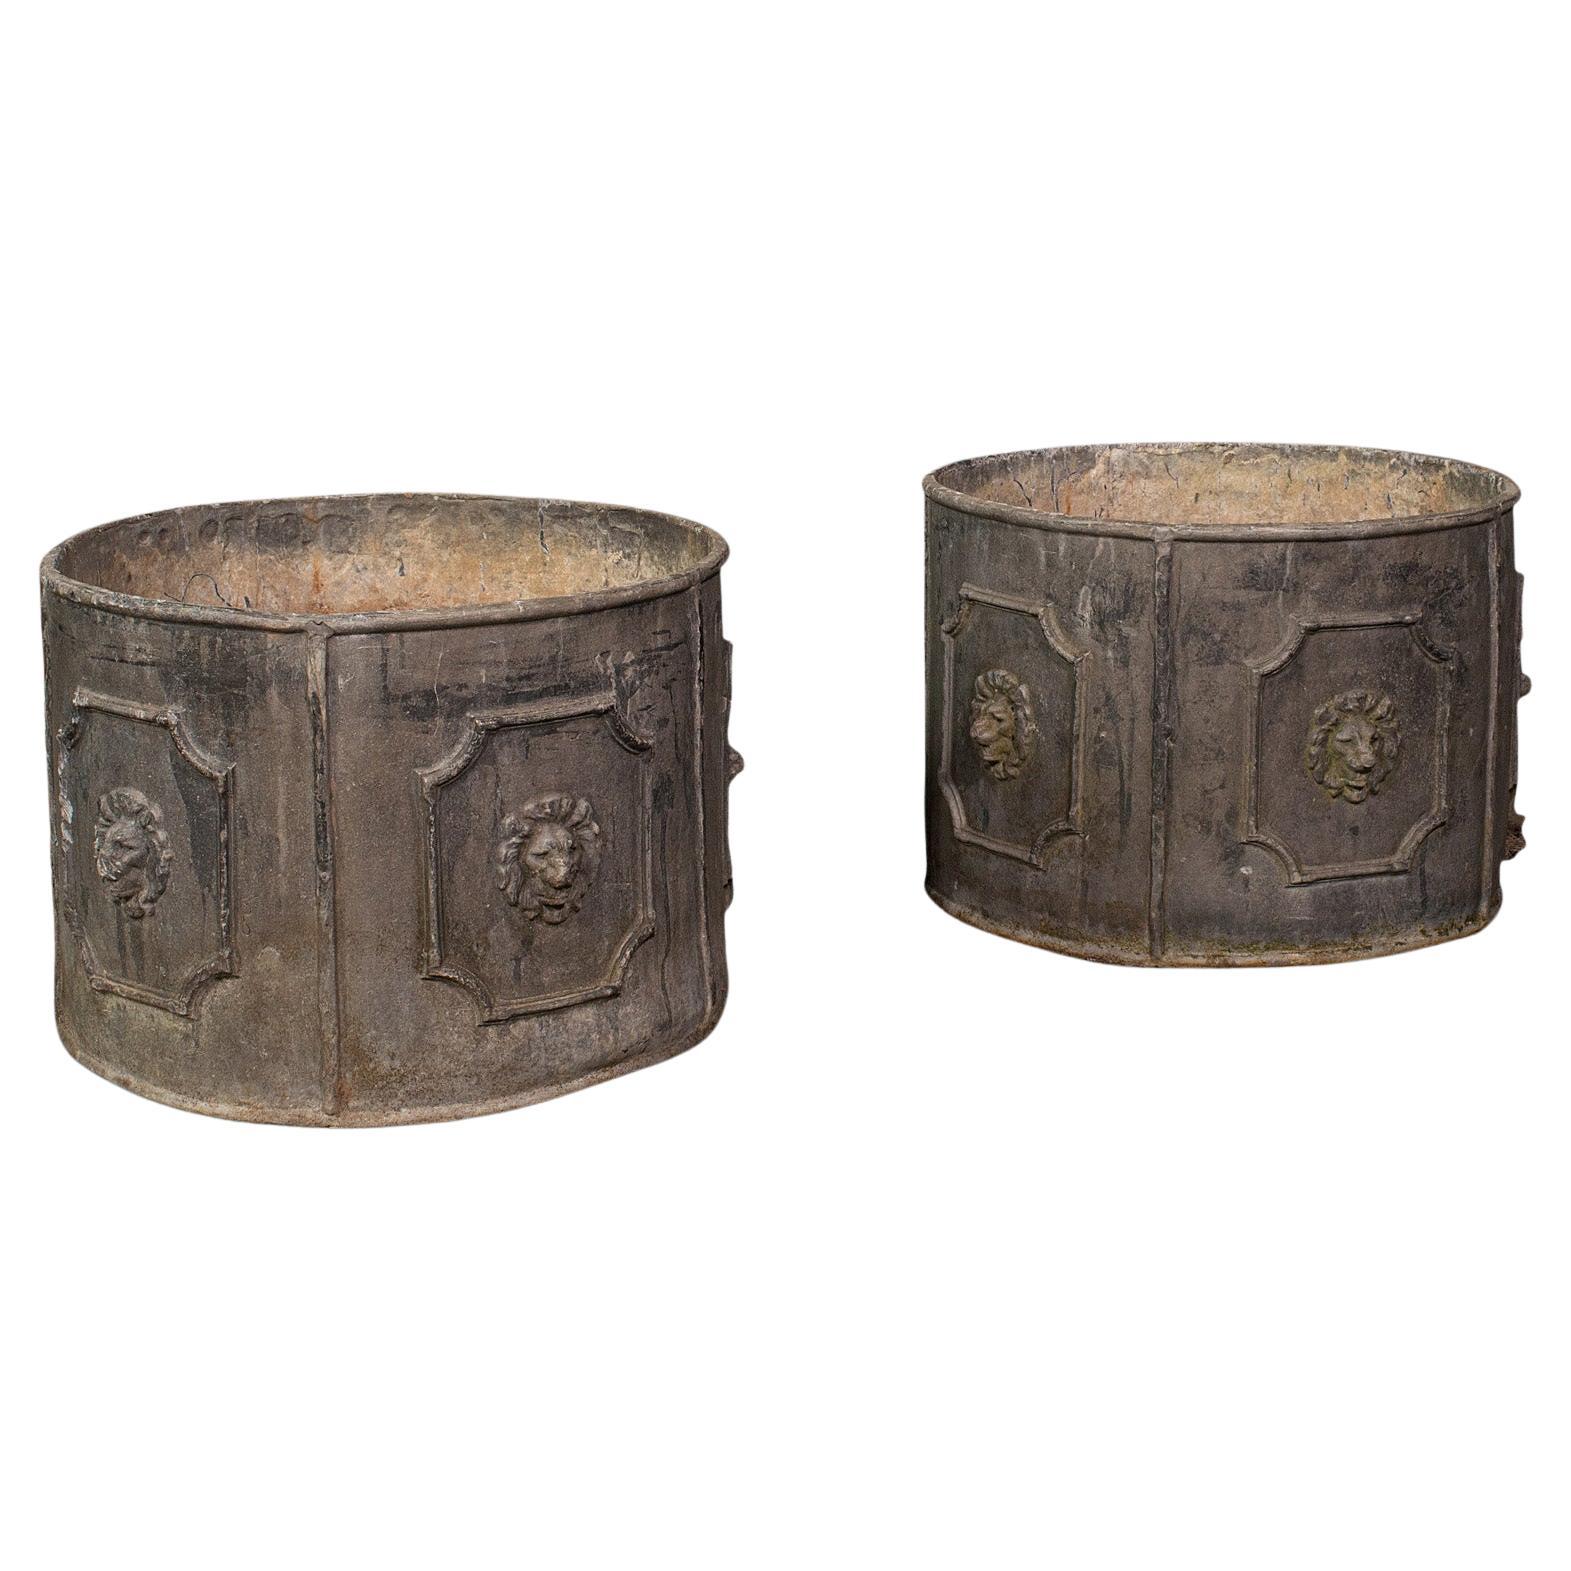 Pair Of Heavy Antique Planters, English, Lead, Planting Pot, Victorian, C.1850 For Sale